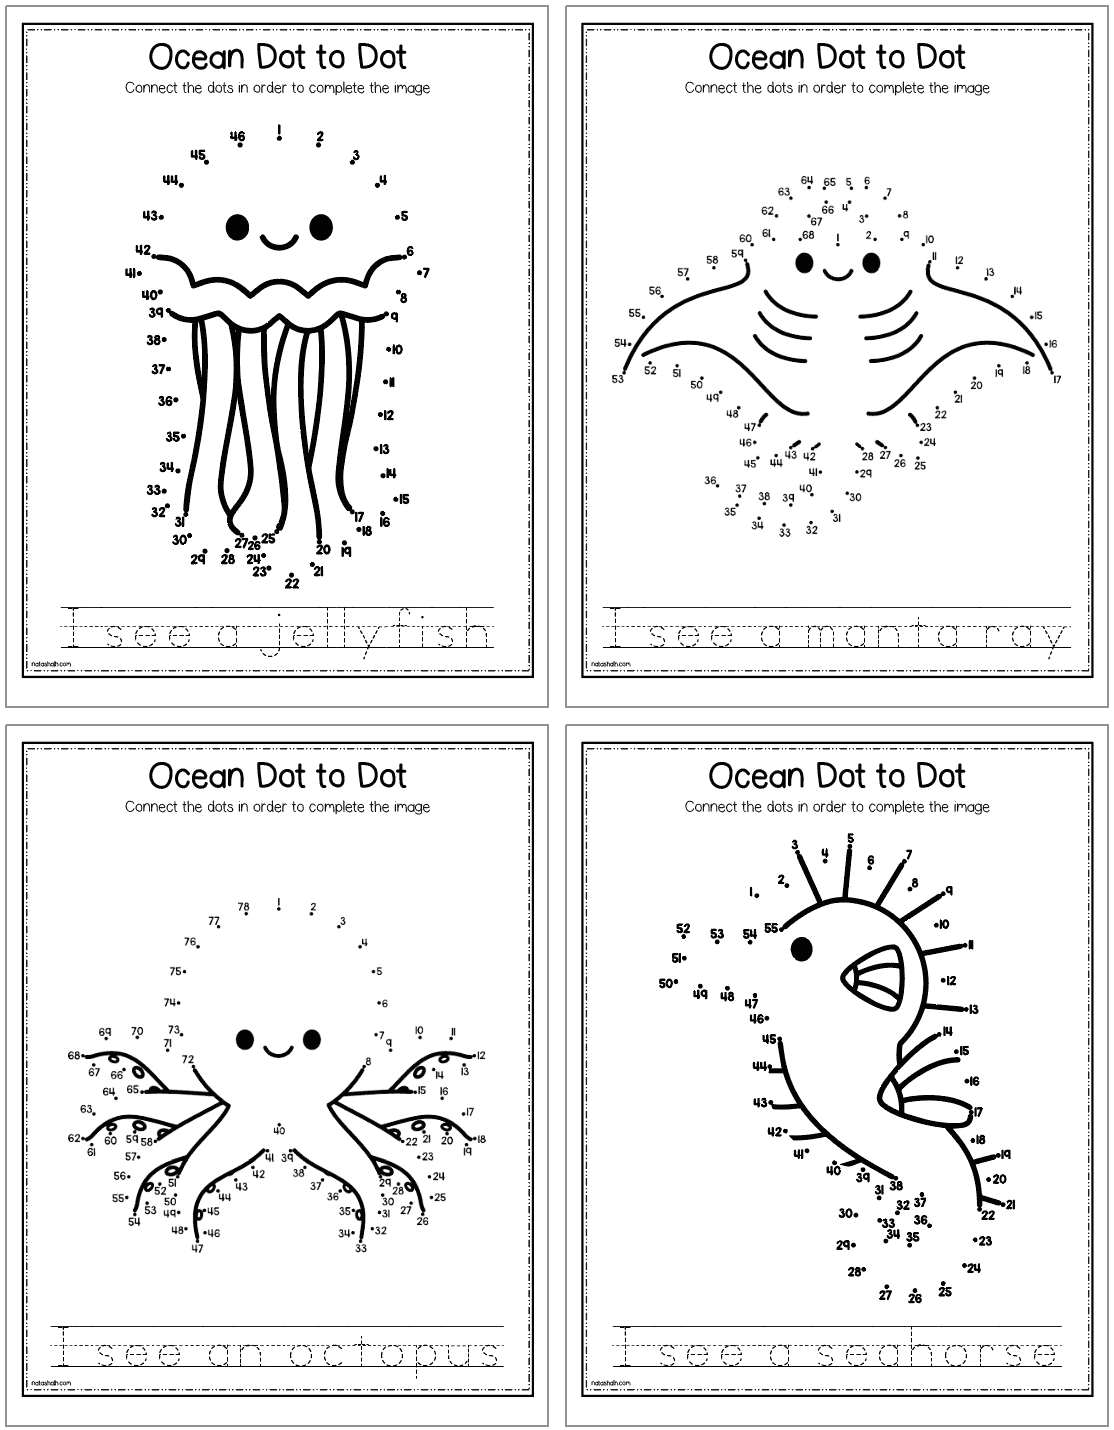 A preview of four ocean animal themed connect the dots pages. Animals featured include: jellyfish, manta ray, octopus, seahorse